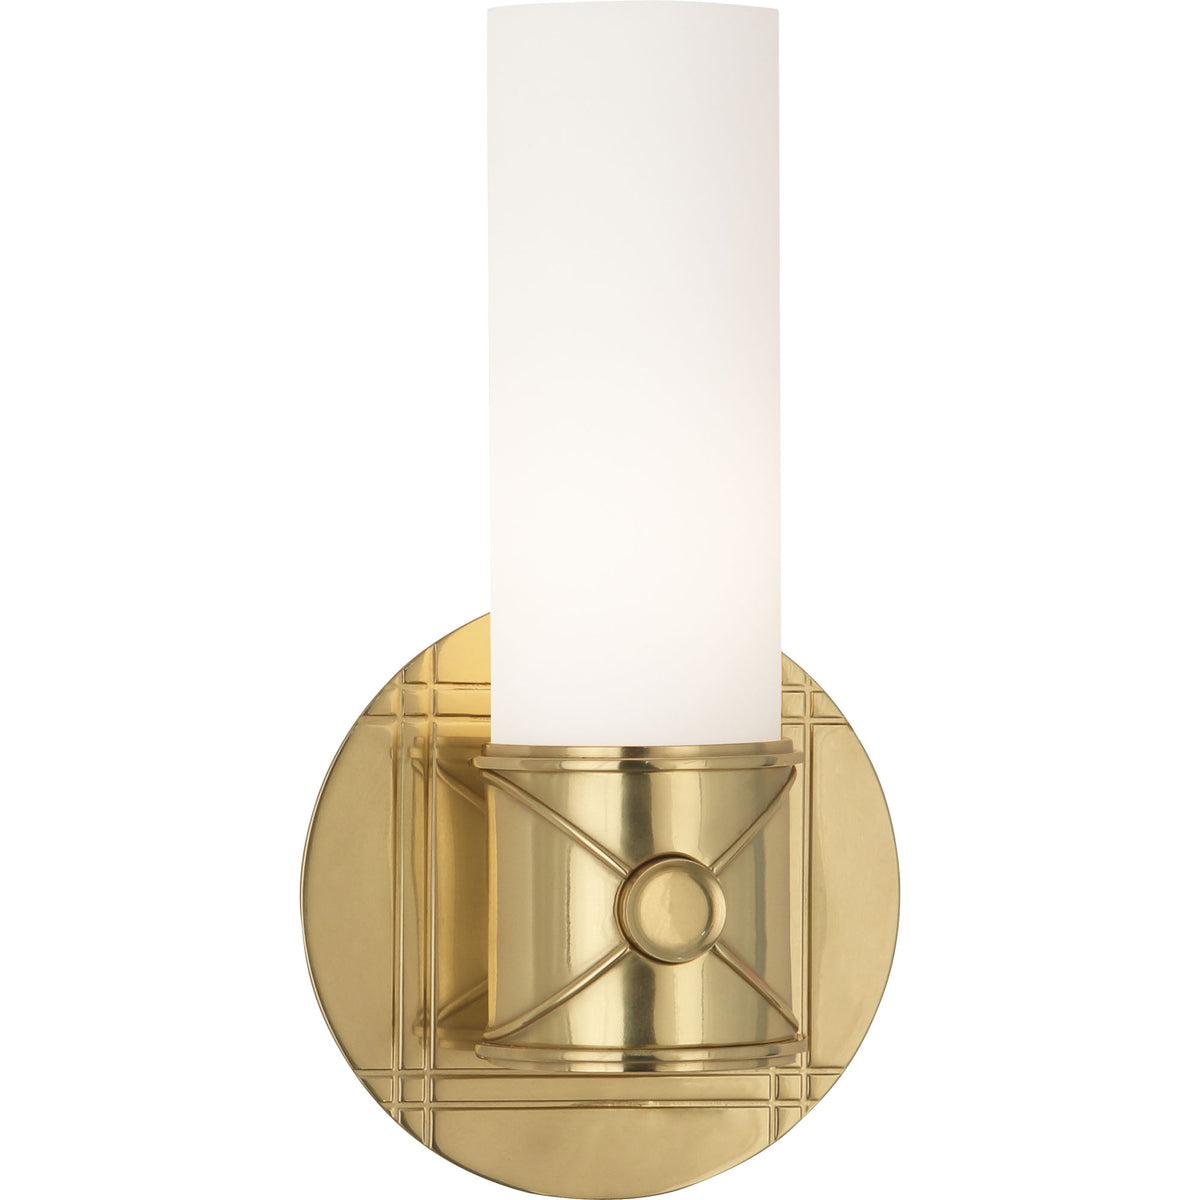 Jonathan Adler Maxime Wall Sconce by Robert Abbey